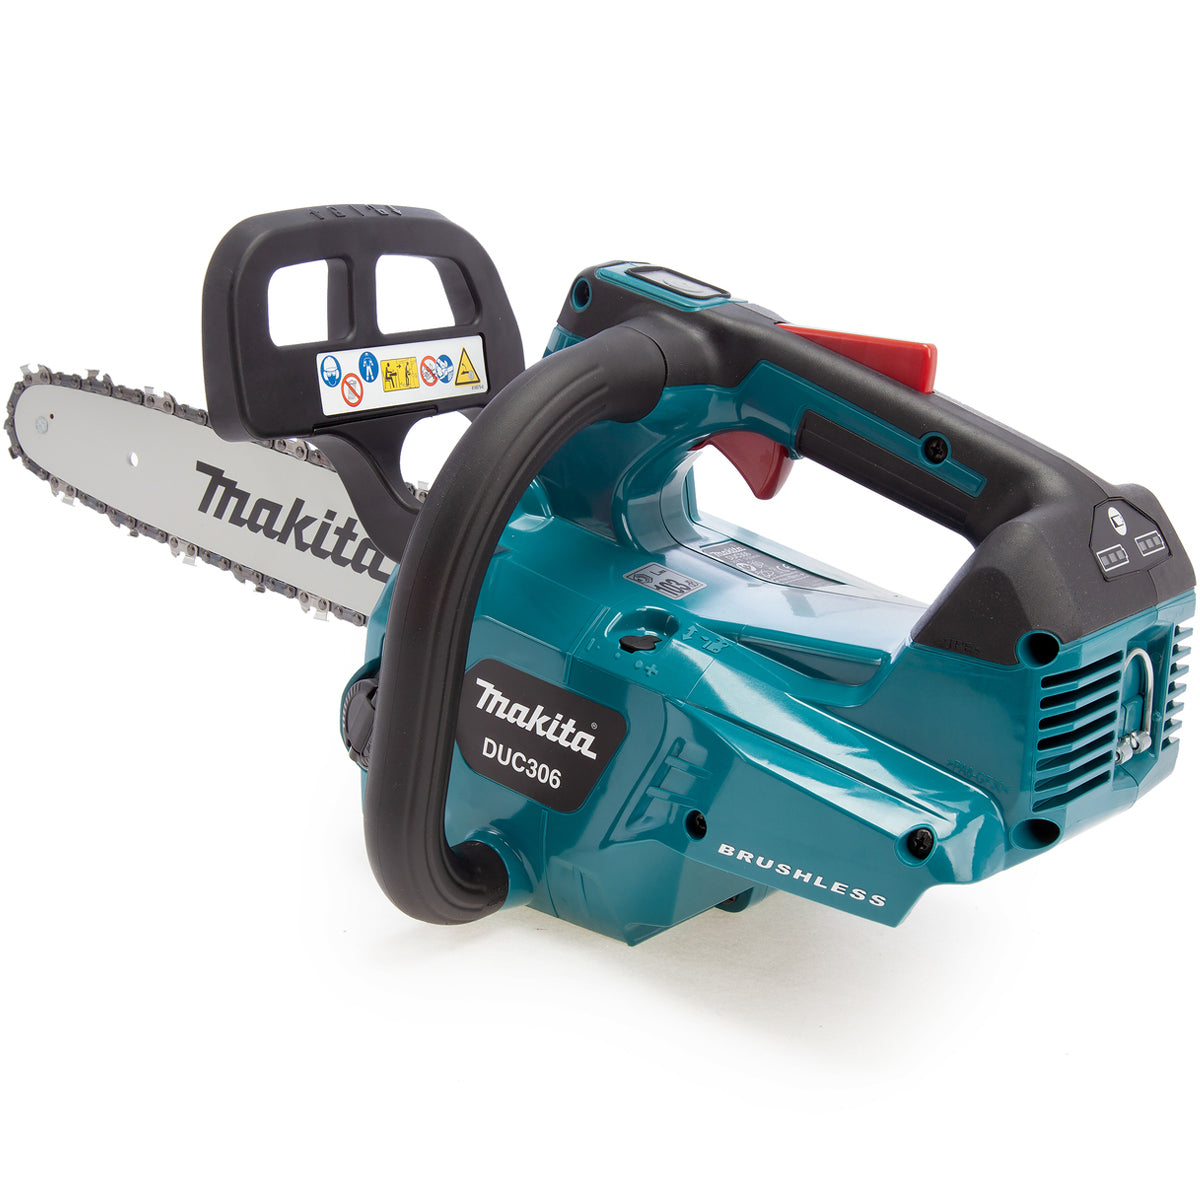 Makita DUC306Z 36V LXT Brushless Top Handle Chainsaw Body Only